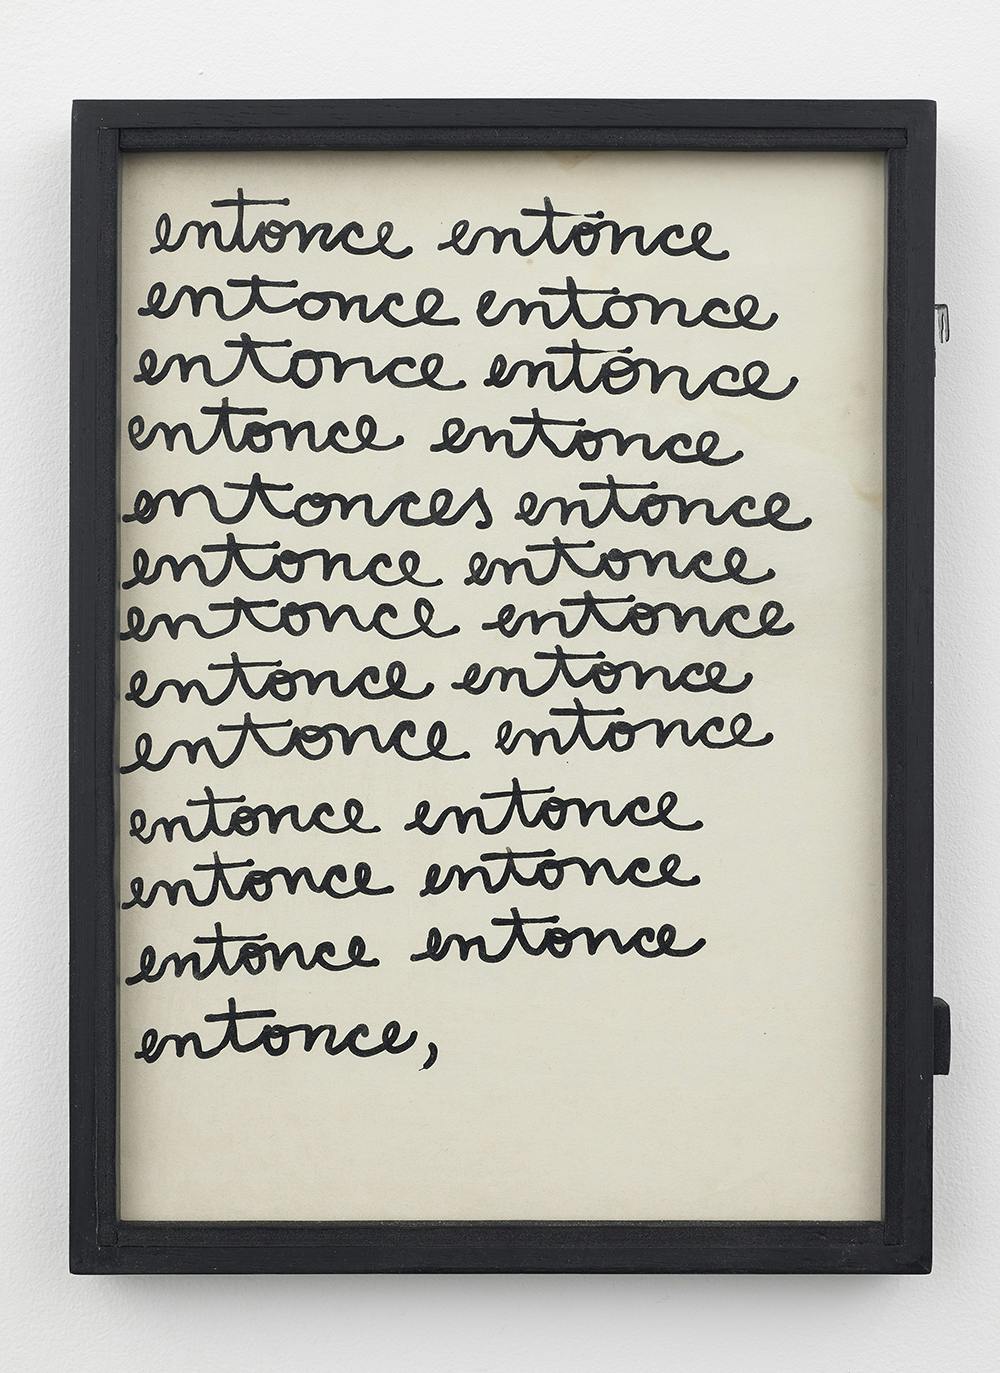 Framed, hand-painted note with the word "entonce" repeated throughout the page.